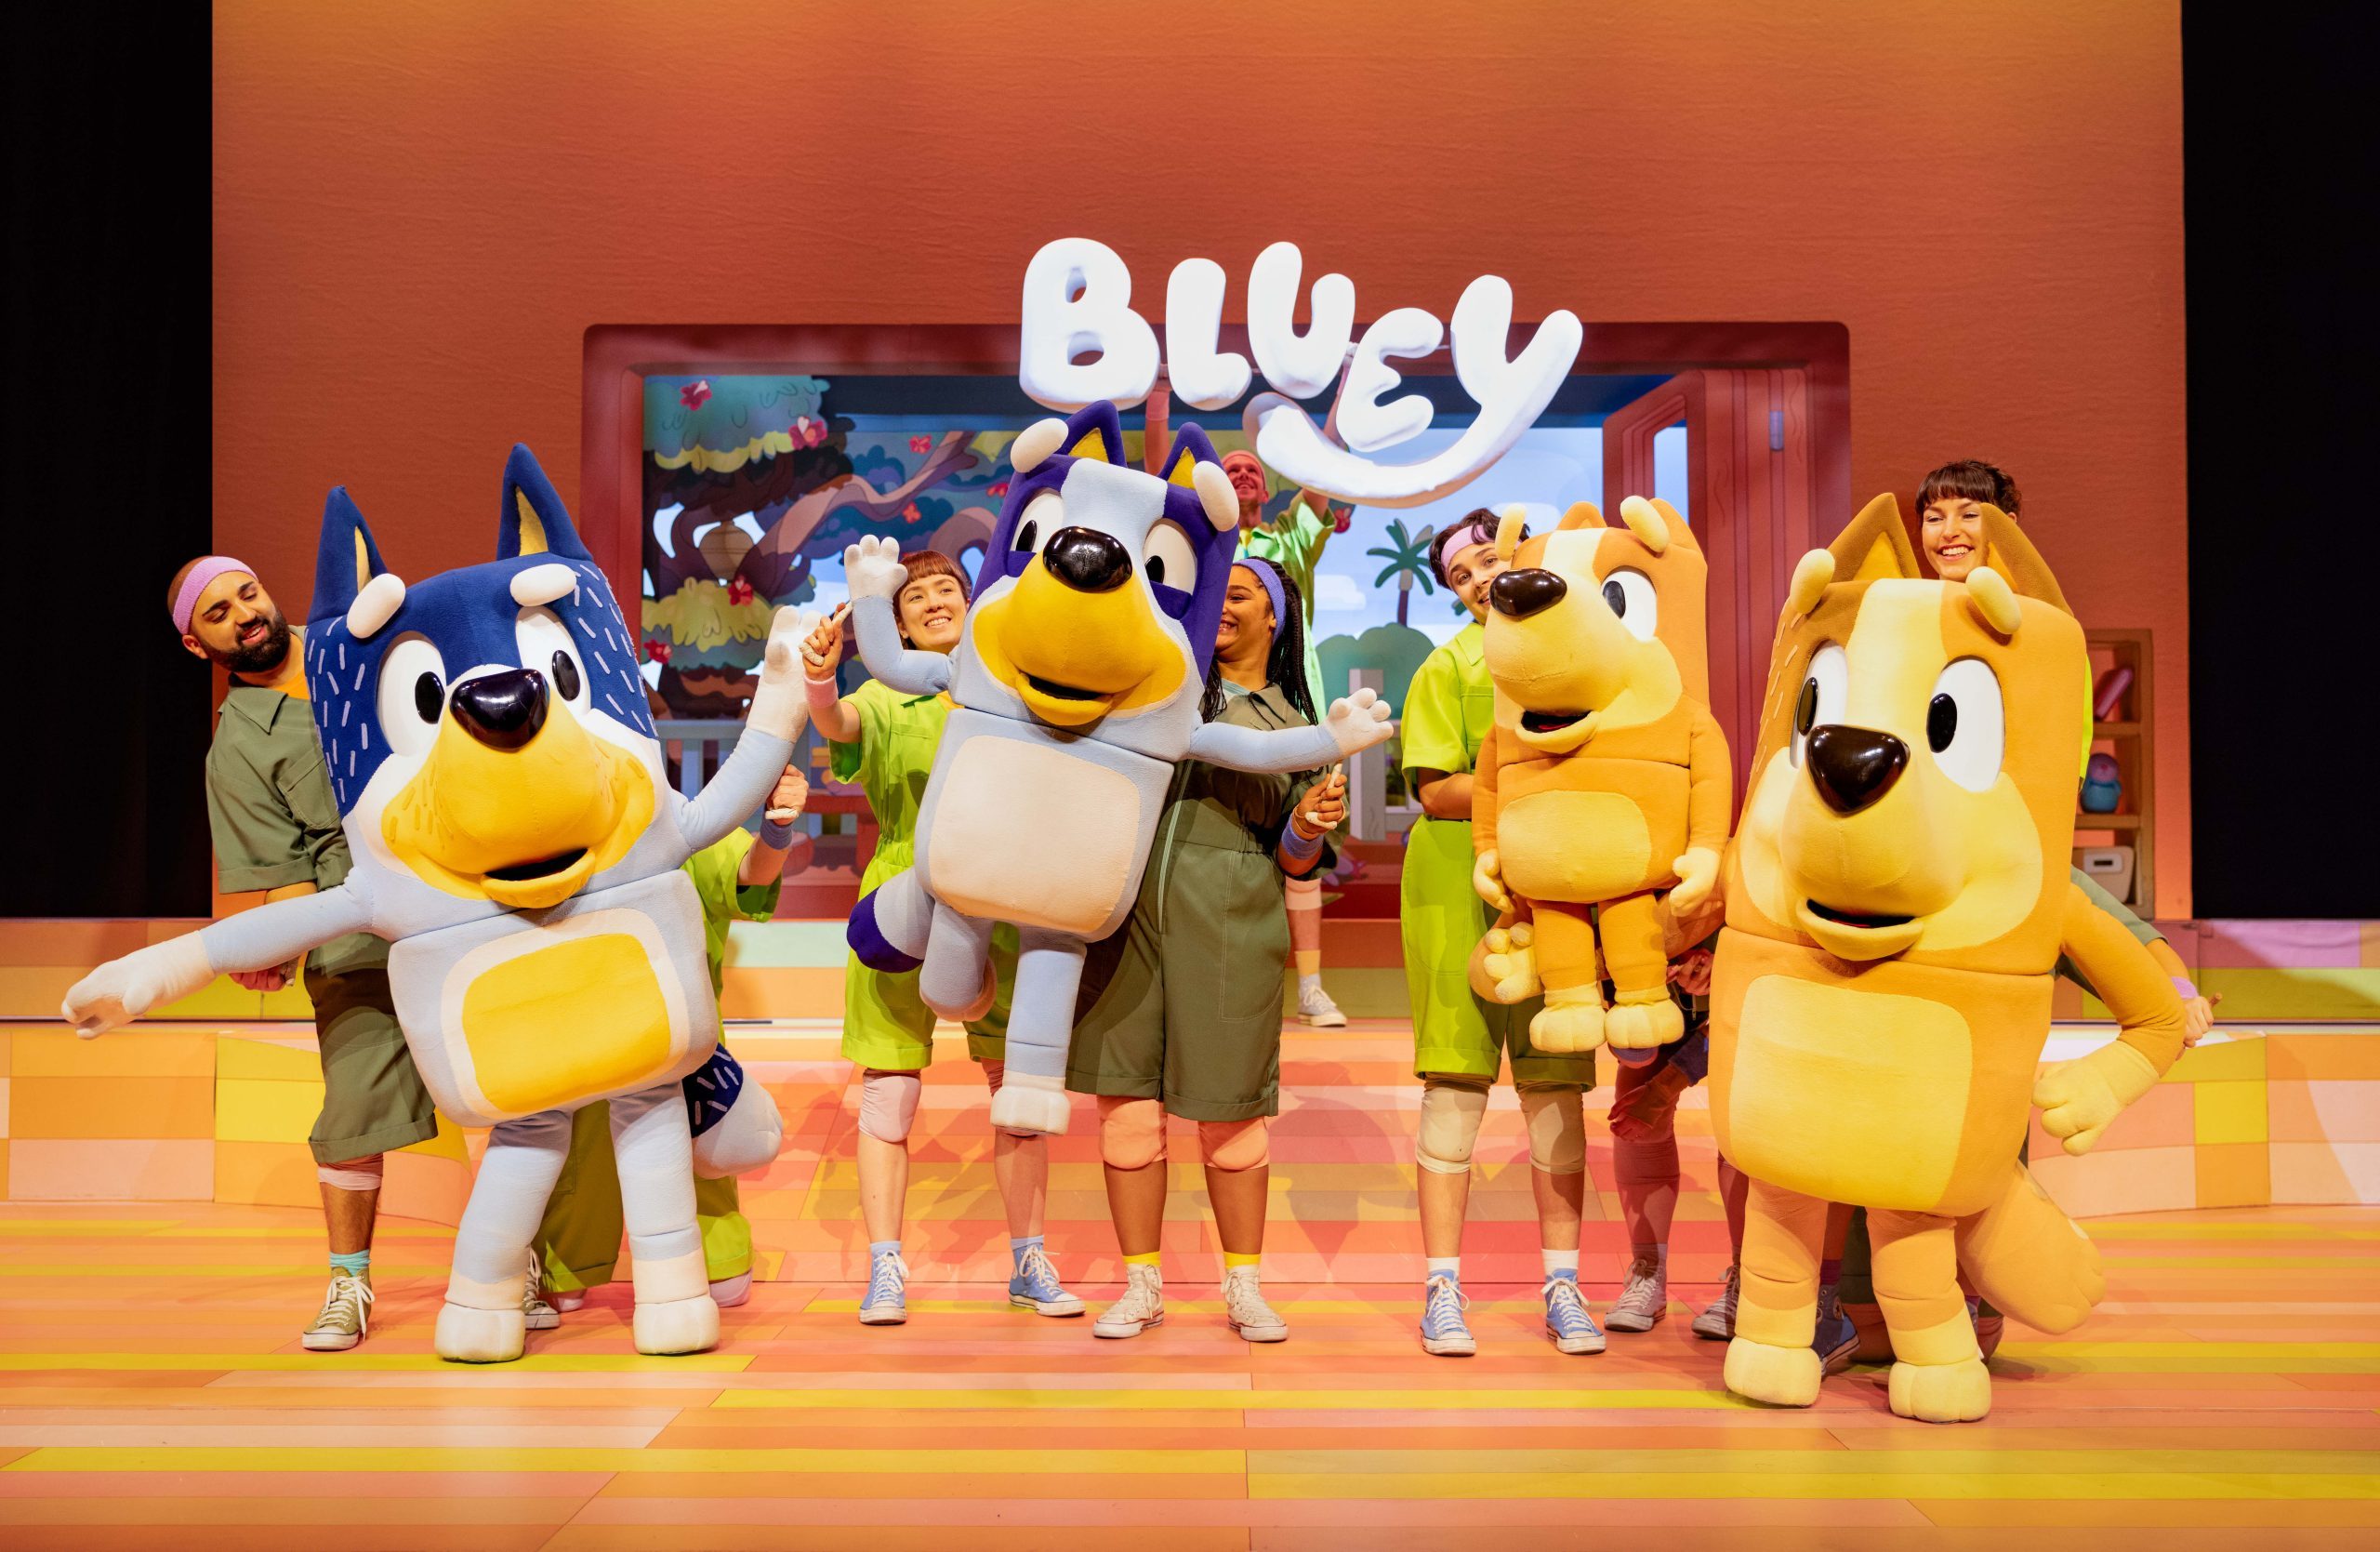 Bluey's Big Play tour 2023: Where to buy tickets, prices, dates